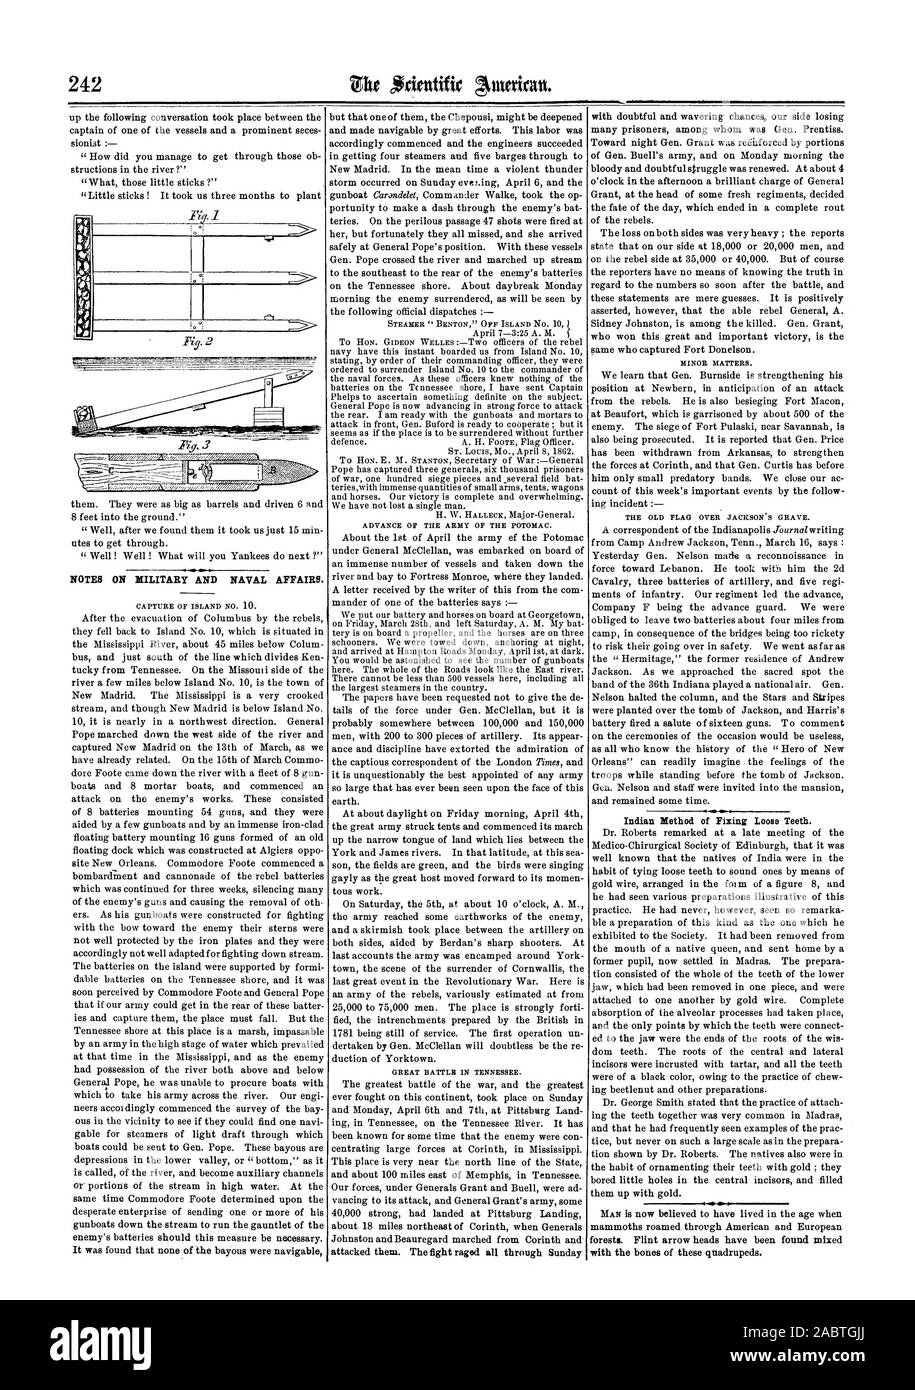 NOTES ON MILITARY AND NAVAL AFFAIRS., scientific american, 1862-04-19 Stock Photo